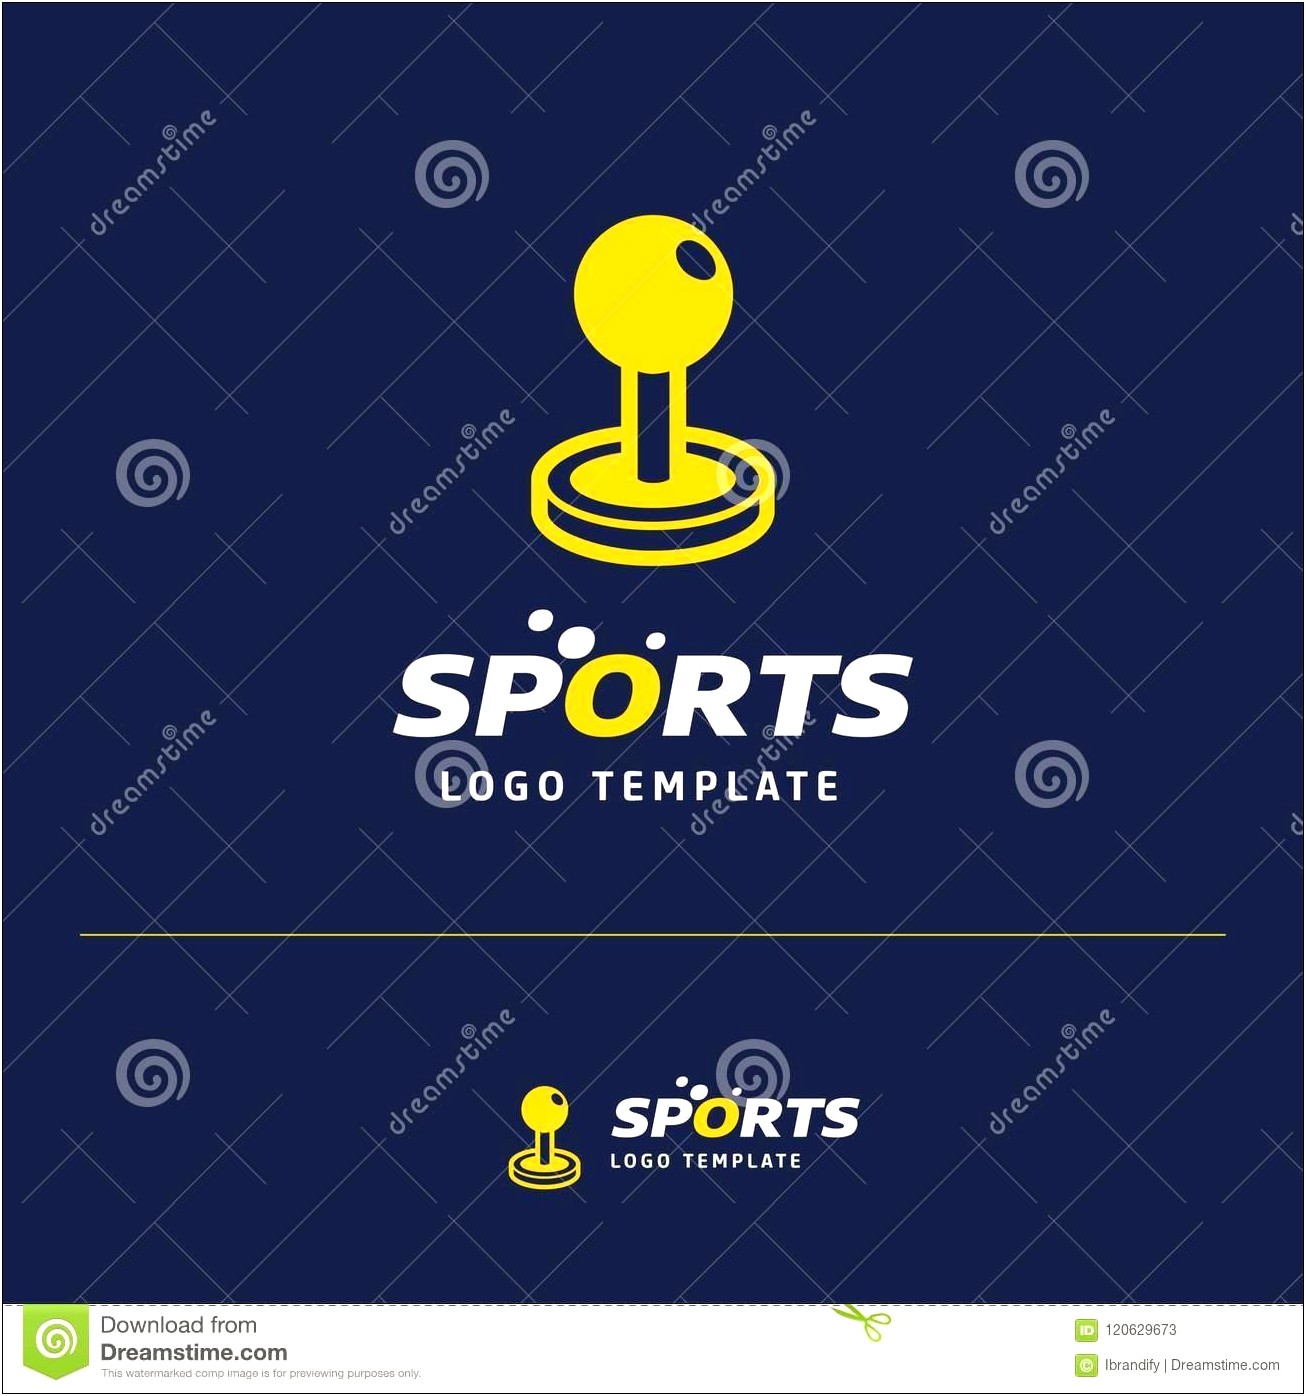 Free Sports Themed Business Card Templates